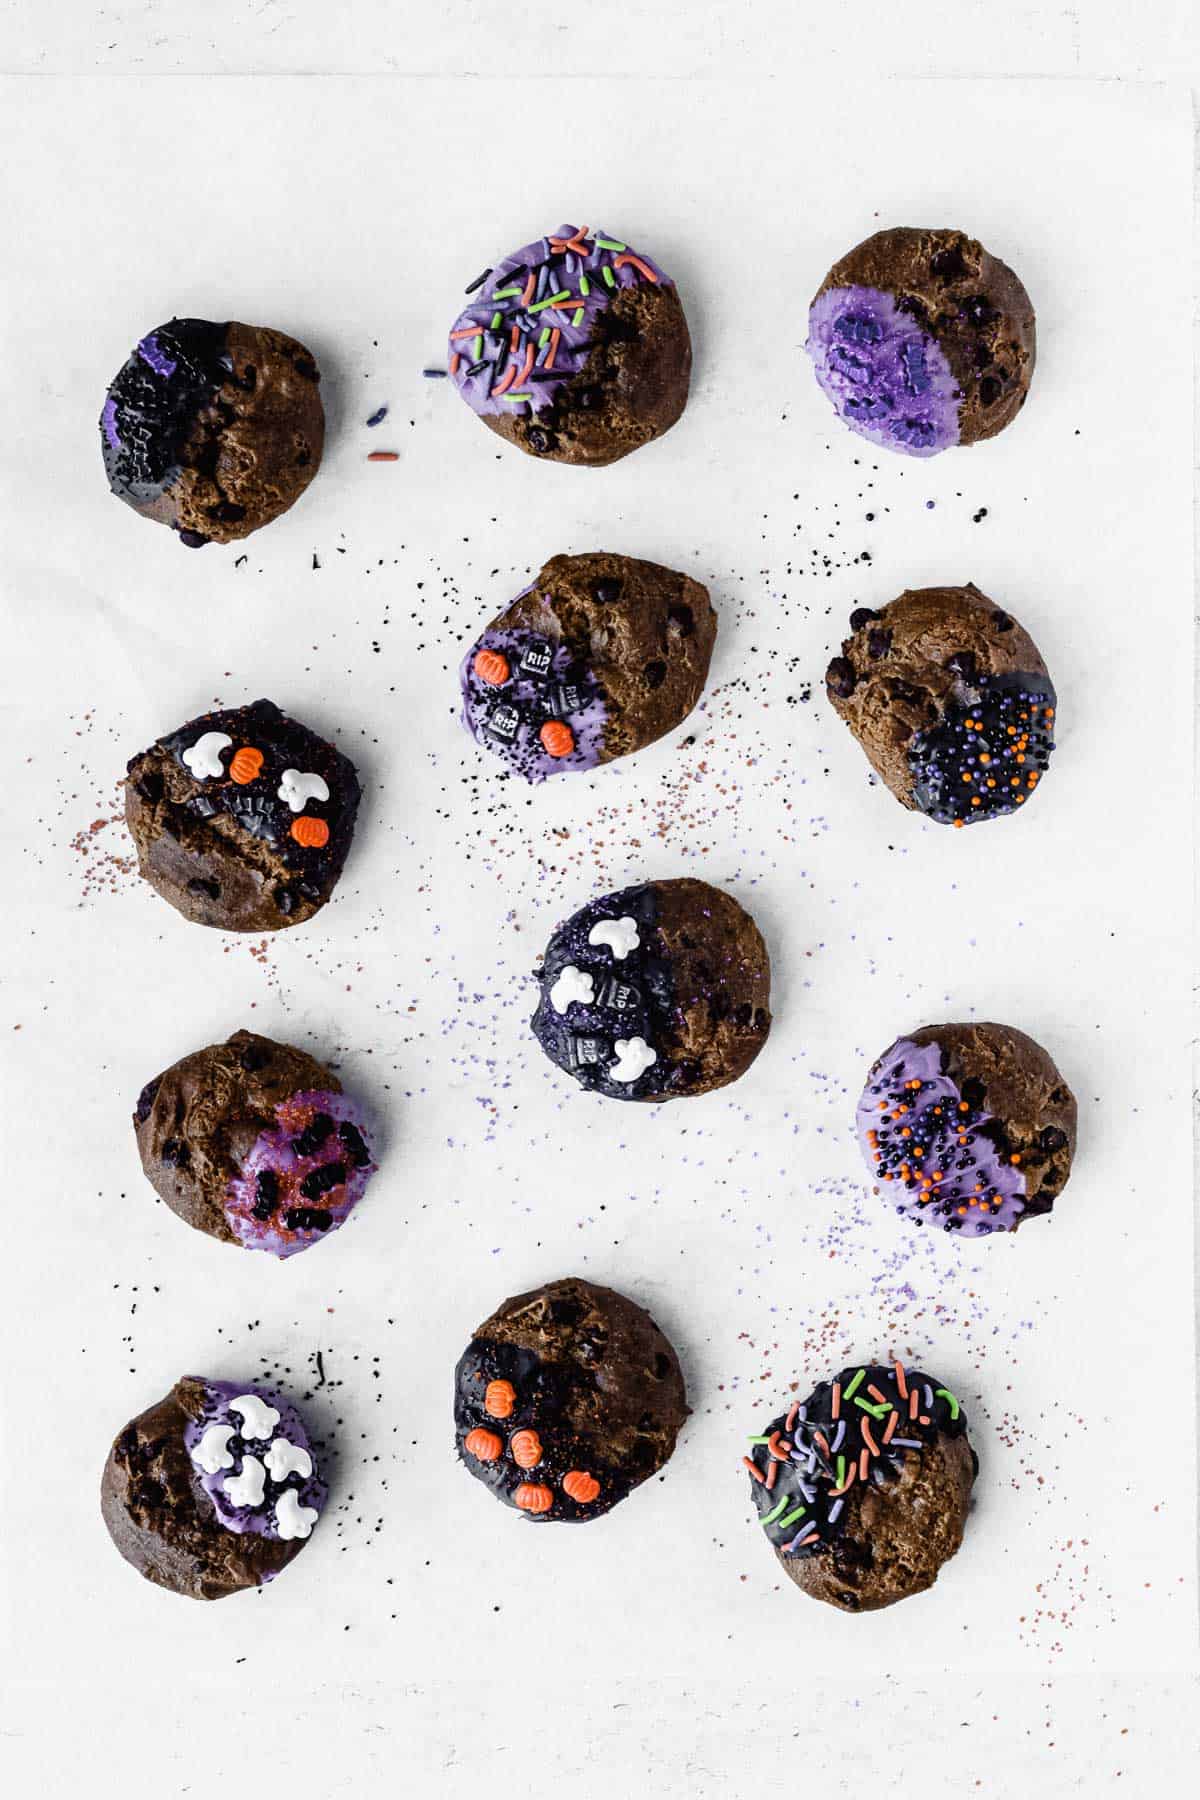 Chocolate chip cookies decorated for Halloween on a sheet of parchment paper